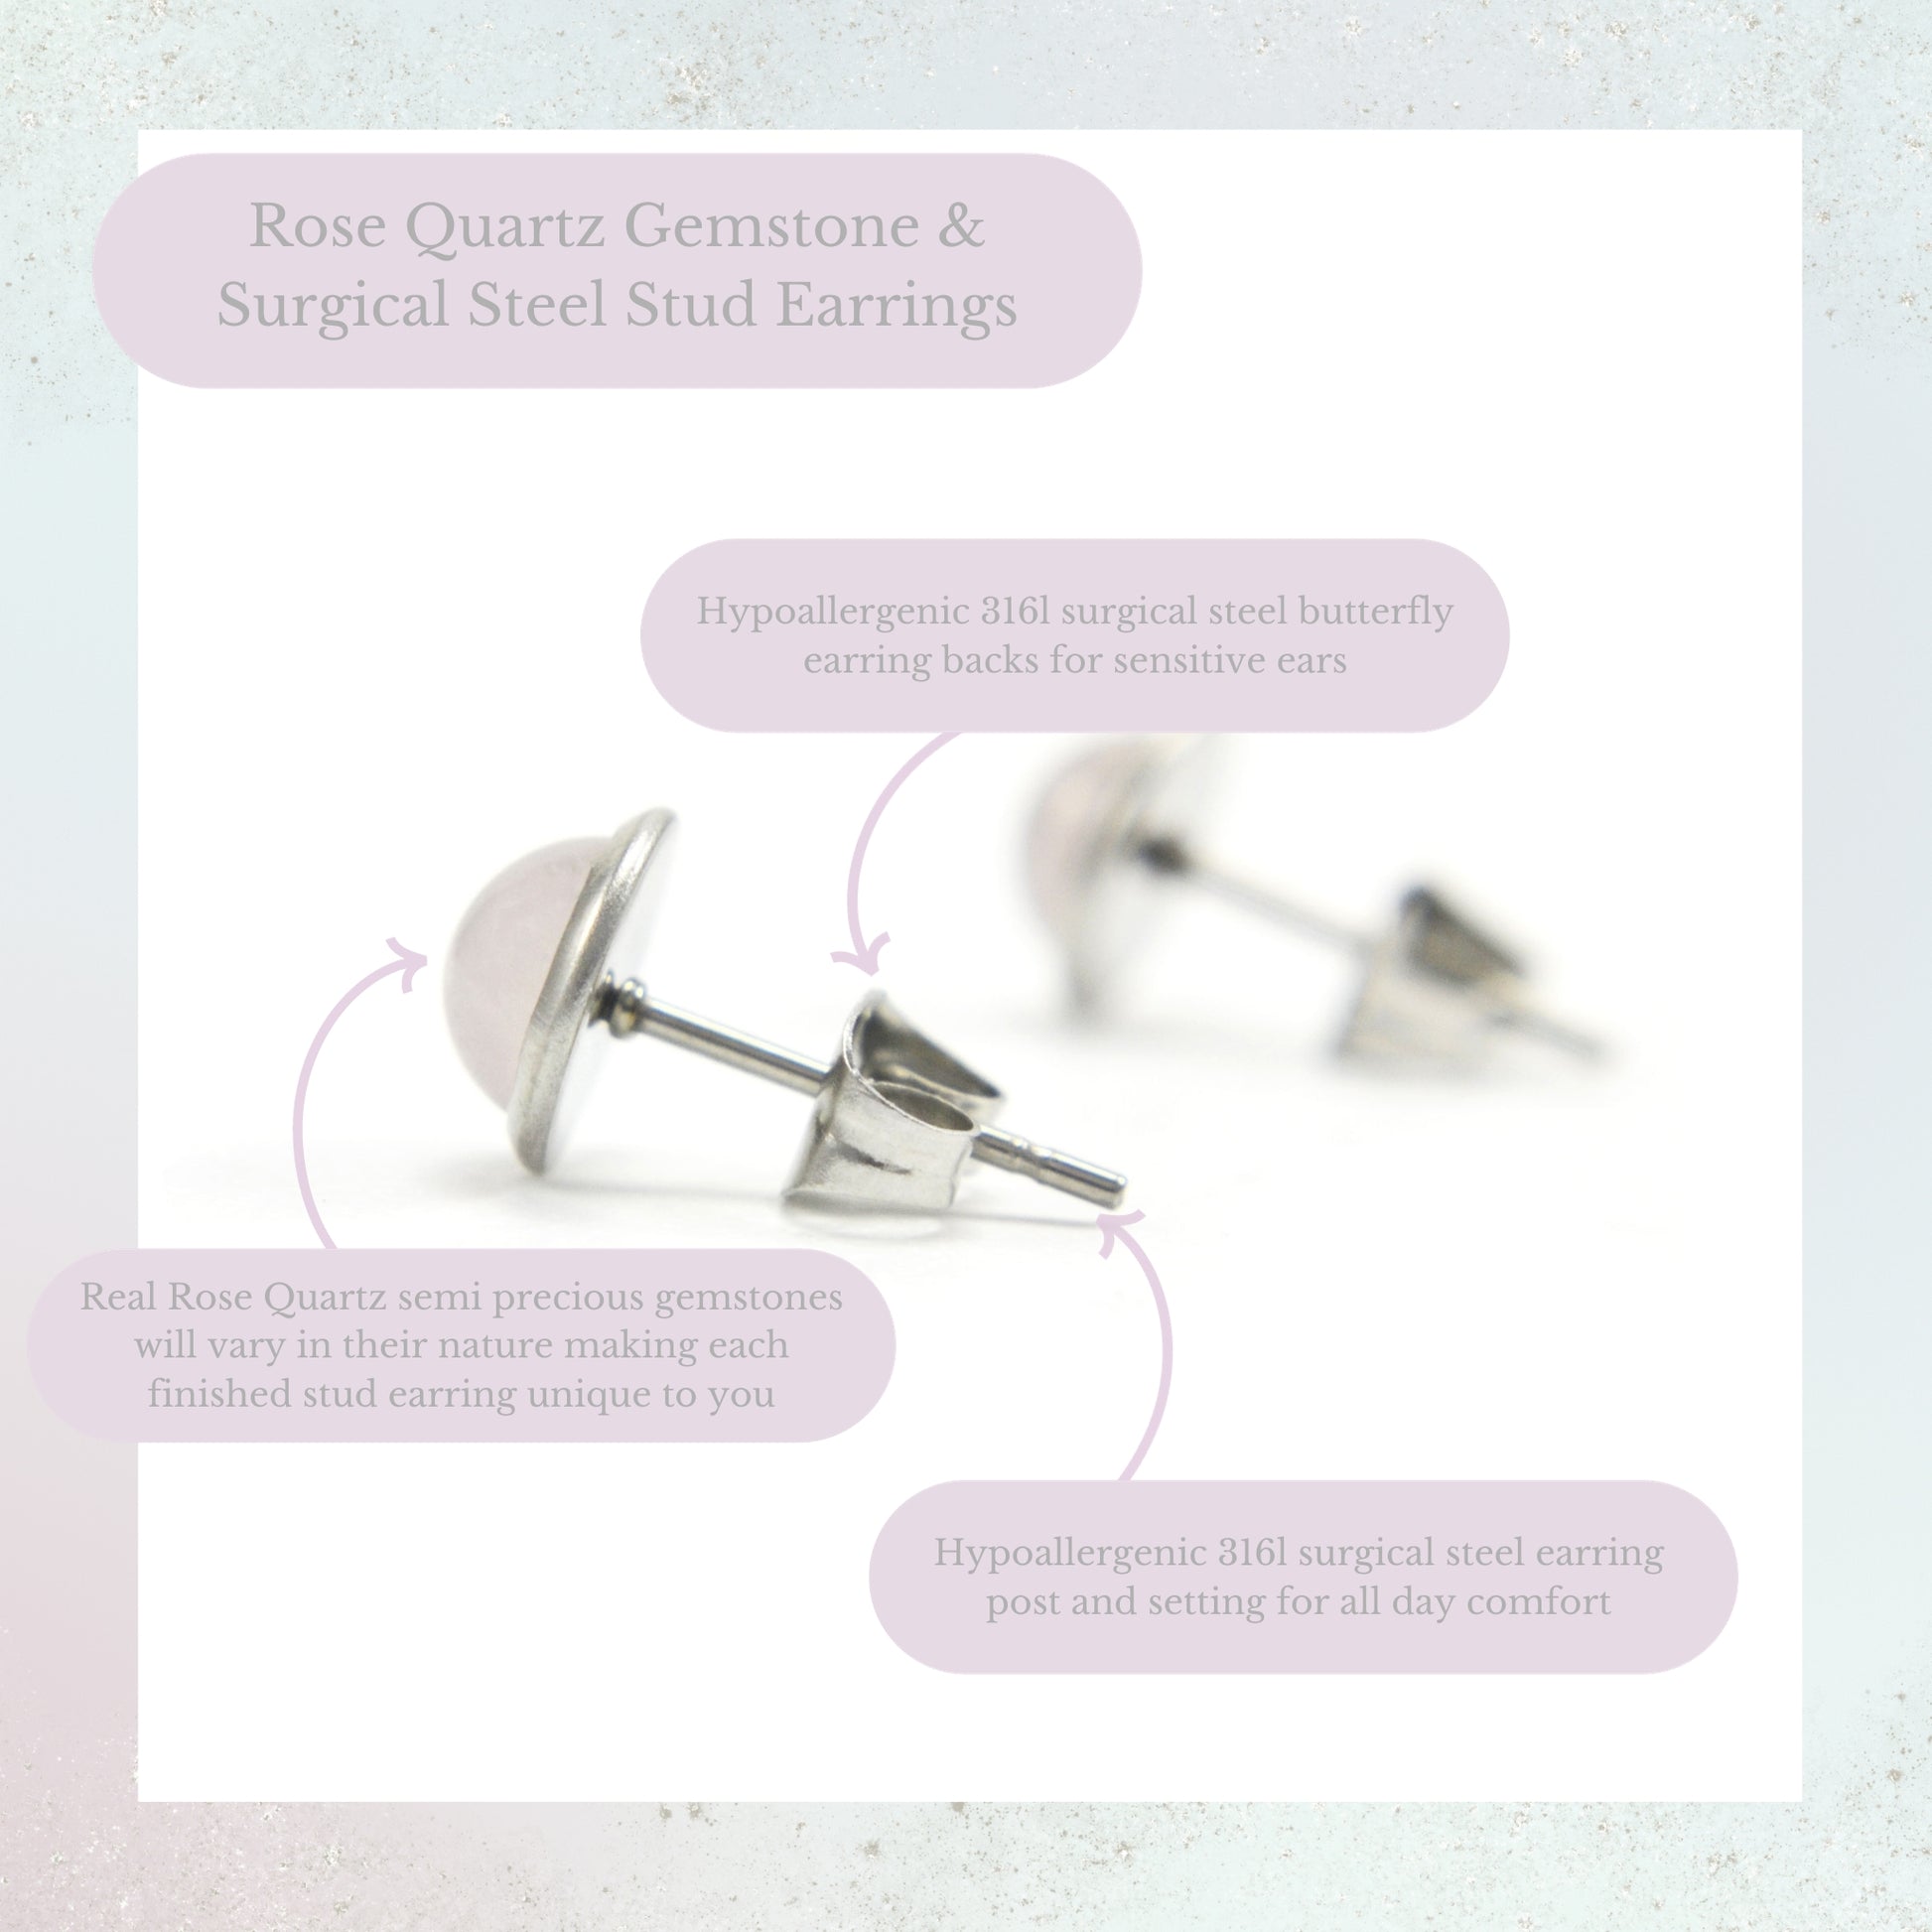 Rose Quartz Gemstone & Surgical Steel Stud Earrings Product Information Graphic